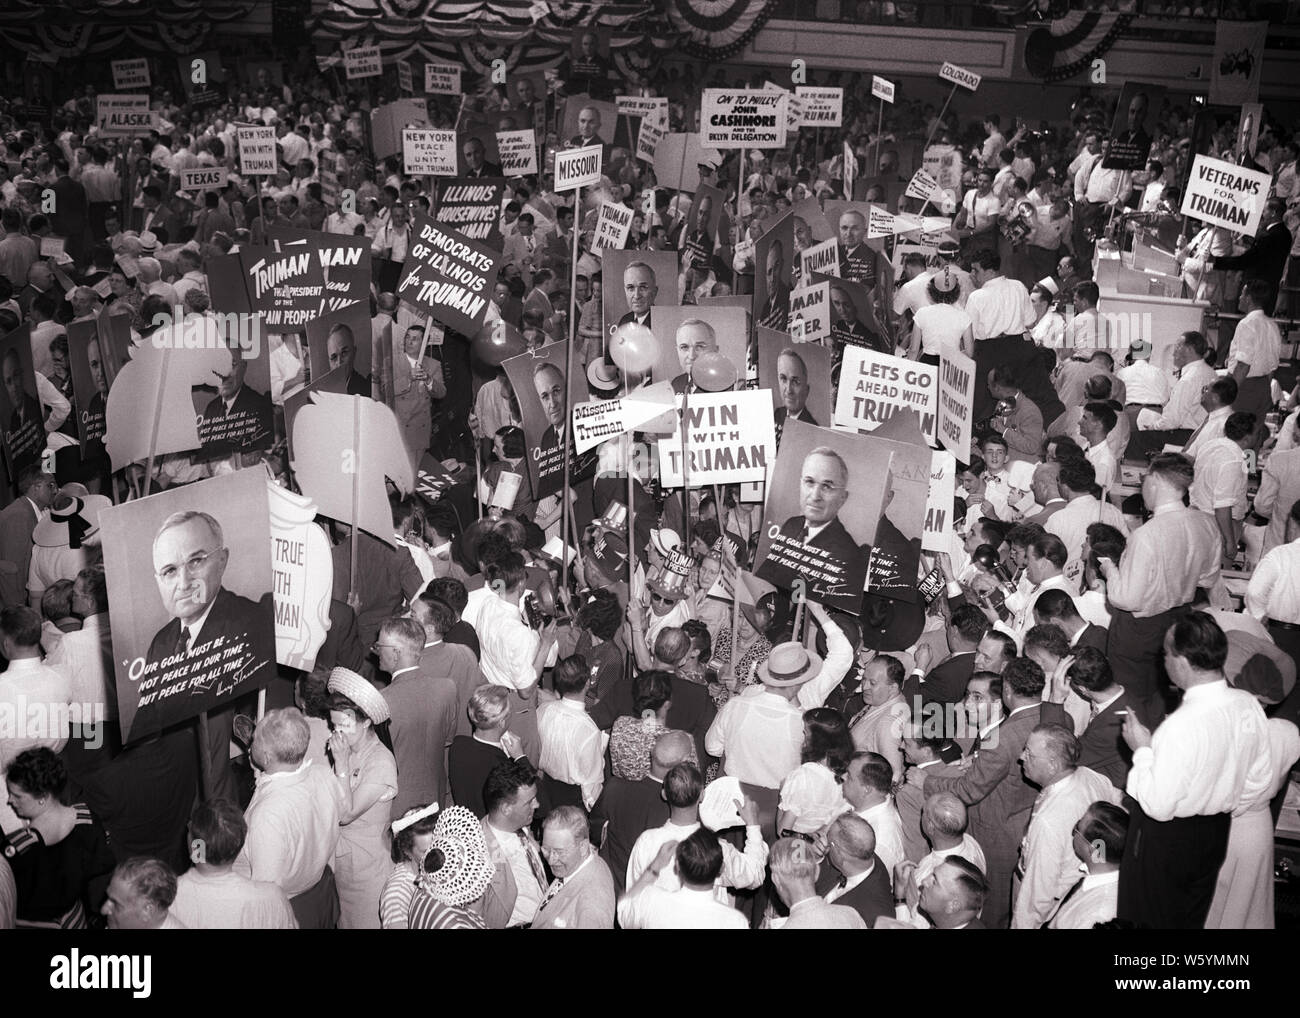 1948 OVERHEAD VIEW OF DELEGATES TO DEMOCRATIC NATIONAL POLITICAL PARTY CONVENTION HALL PHILADELPHIA PENNSYLVANIA USA - c527 HAR001 HARS POLITICAL SKILL DREAMS OCCUPATION HAPPINESS SKILLS HEAD AND SHOULDERS HIGH ANGLE STRENGTH STRATEGY CAREERS CHOICE EXCITEMENT LEADERSHIP PA POLITICIAN POWERFUL OF TO OCCUPATIONS POLITICS CONCEPTUAL STYLISH DELEGATION DEMOCRATIC IDEAS TOGETHERNESS 1948 BLACK AND WHITE HAR001 OLD FASHIONED Stock Photo